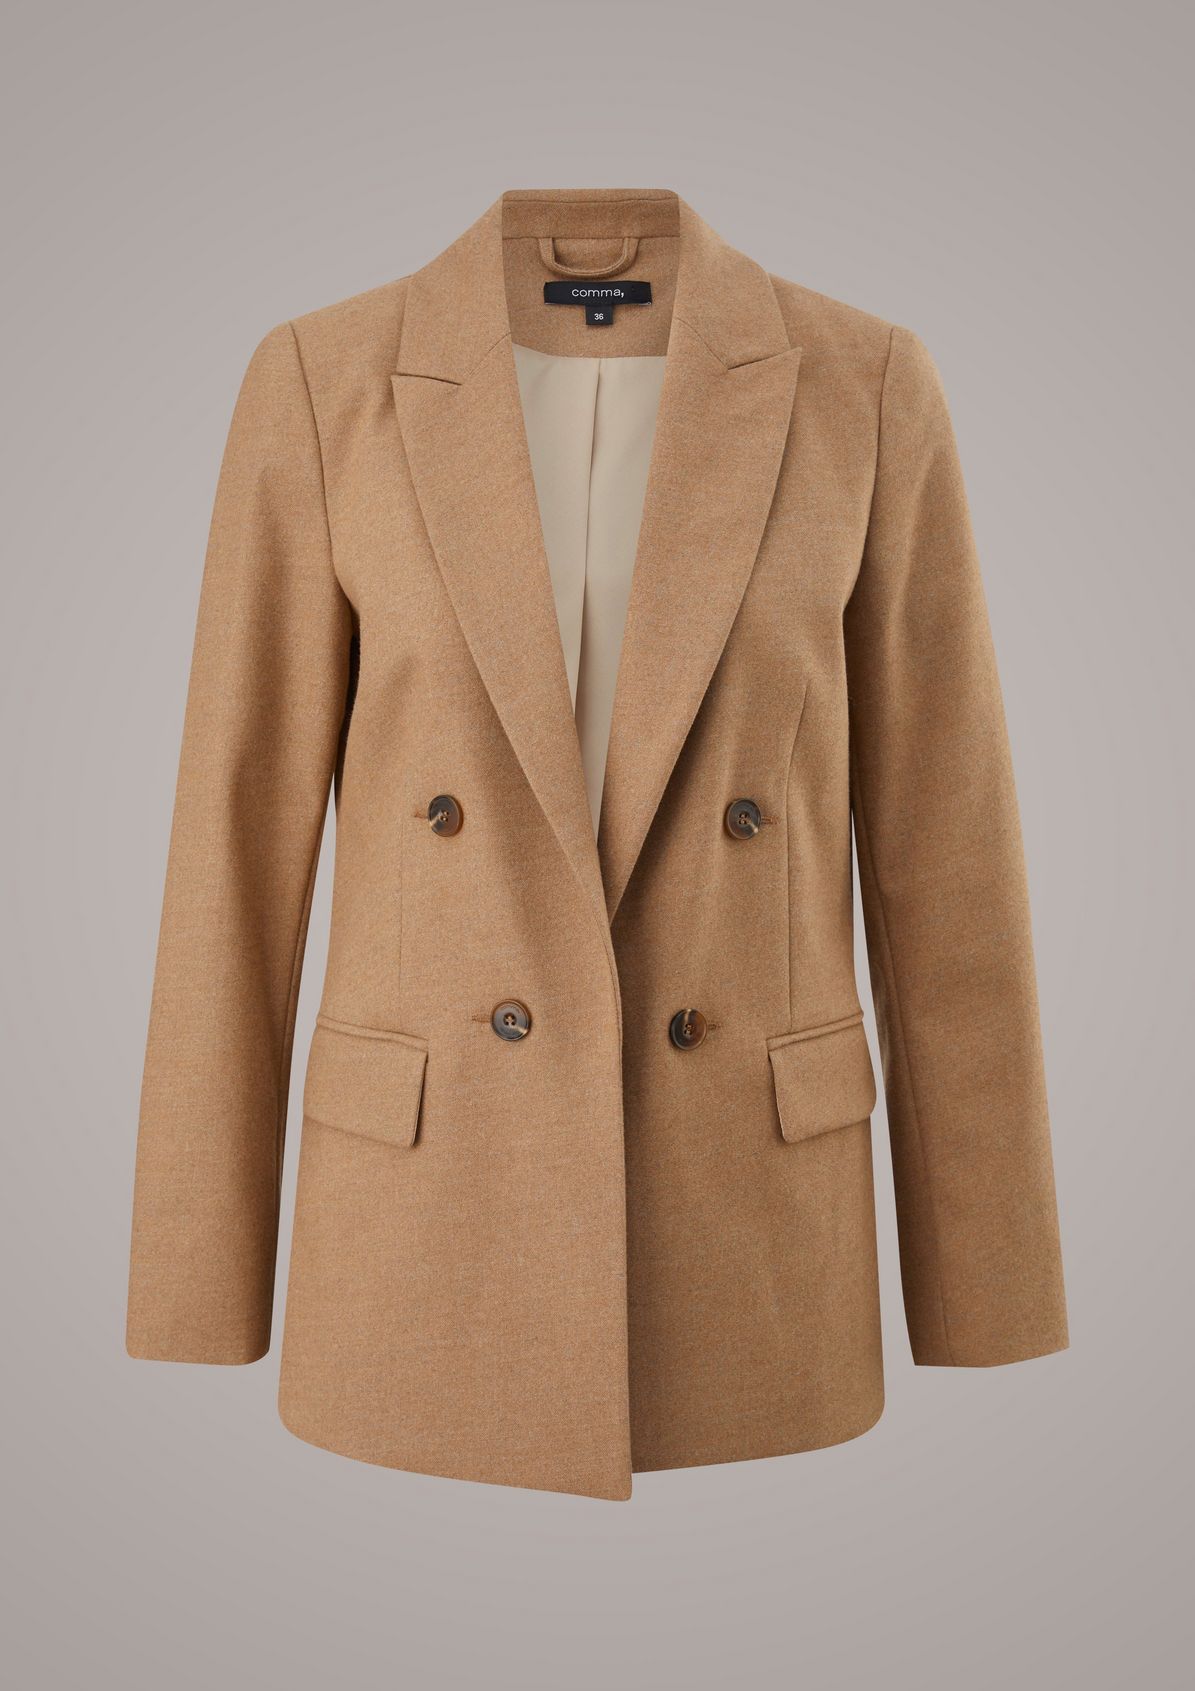 Long blazer with decorative buttons from comma